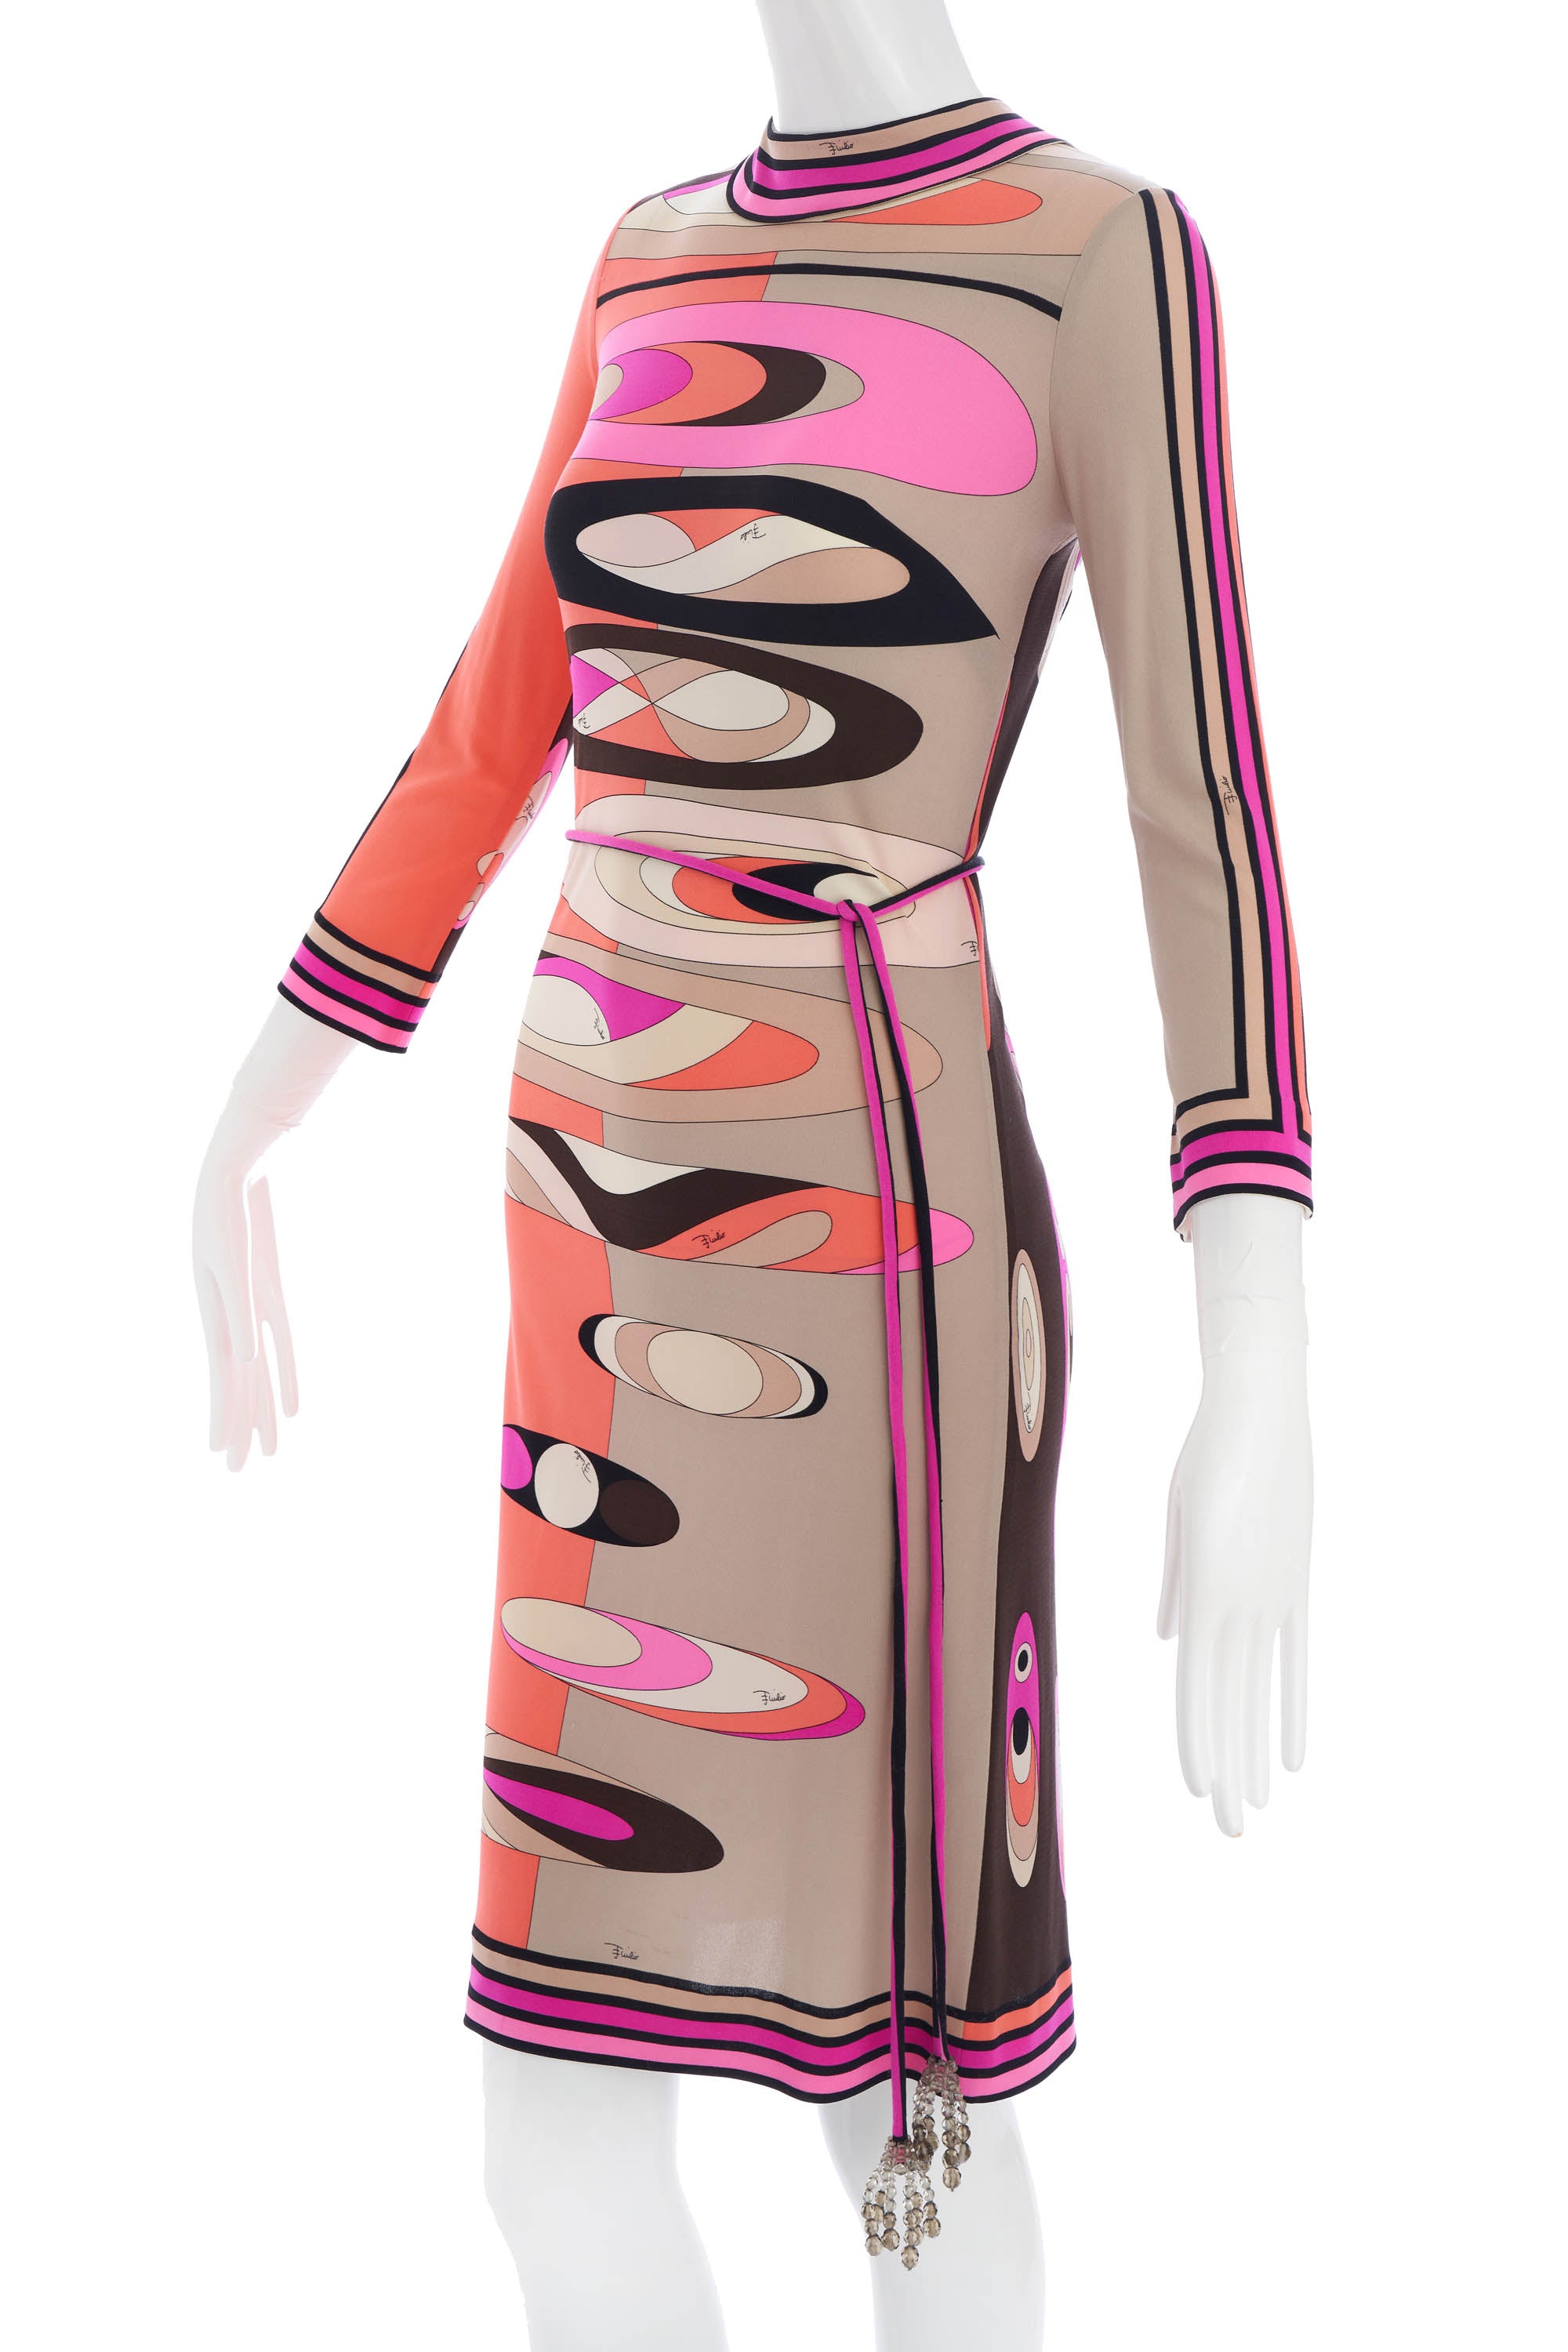 Emilio Pucci Pink and Orange Modern Print Dress with Crystal Belt Size M